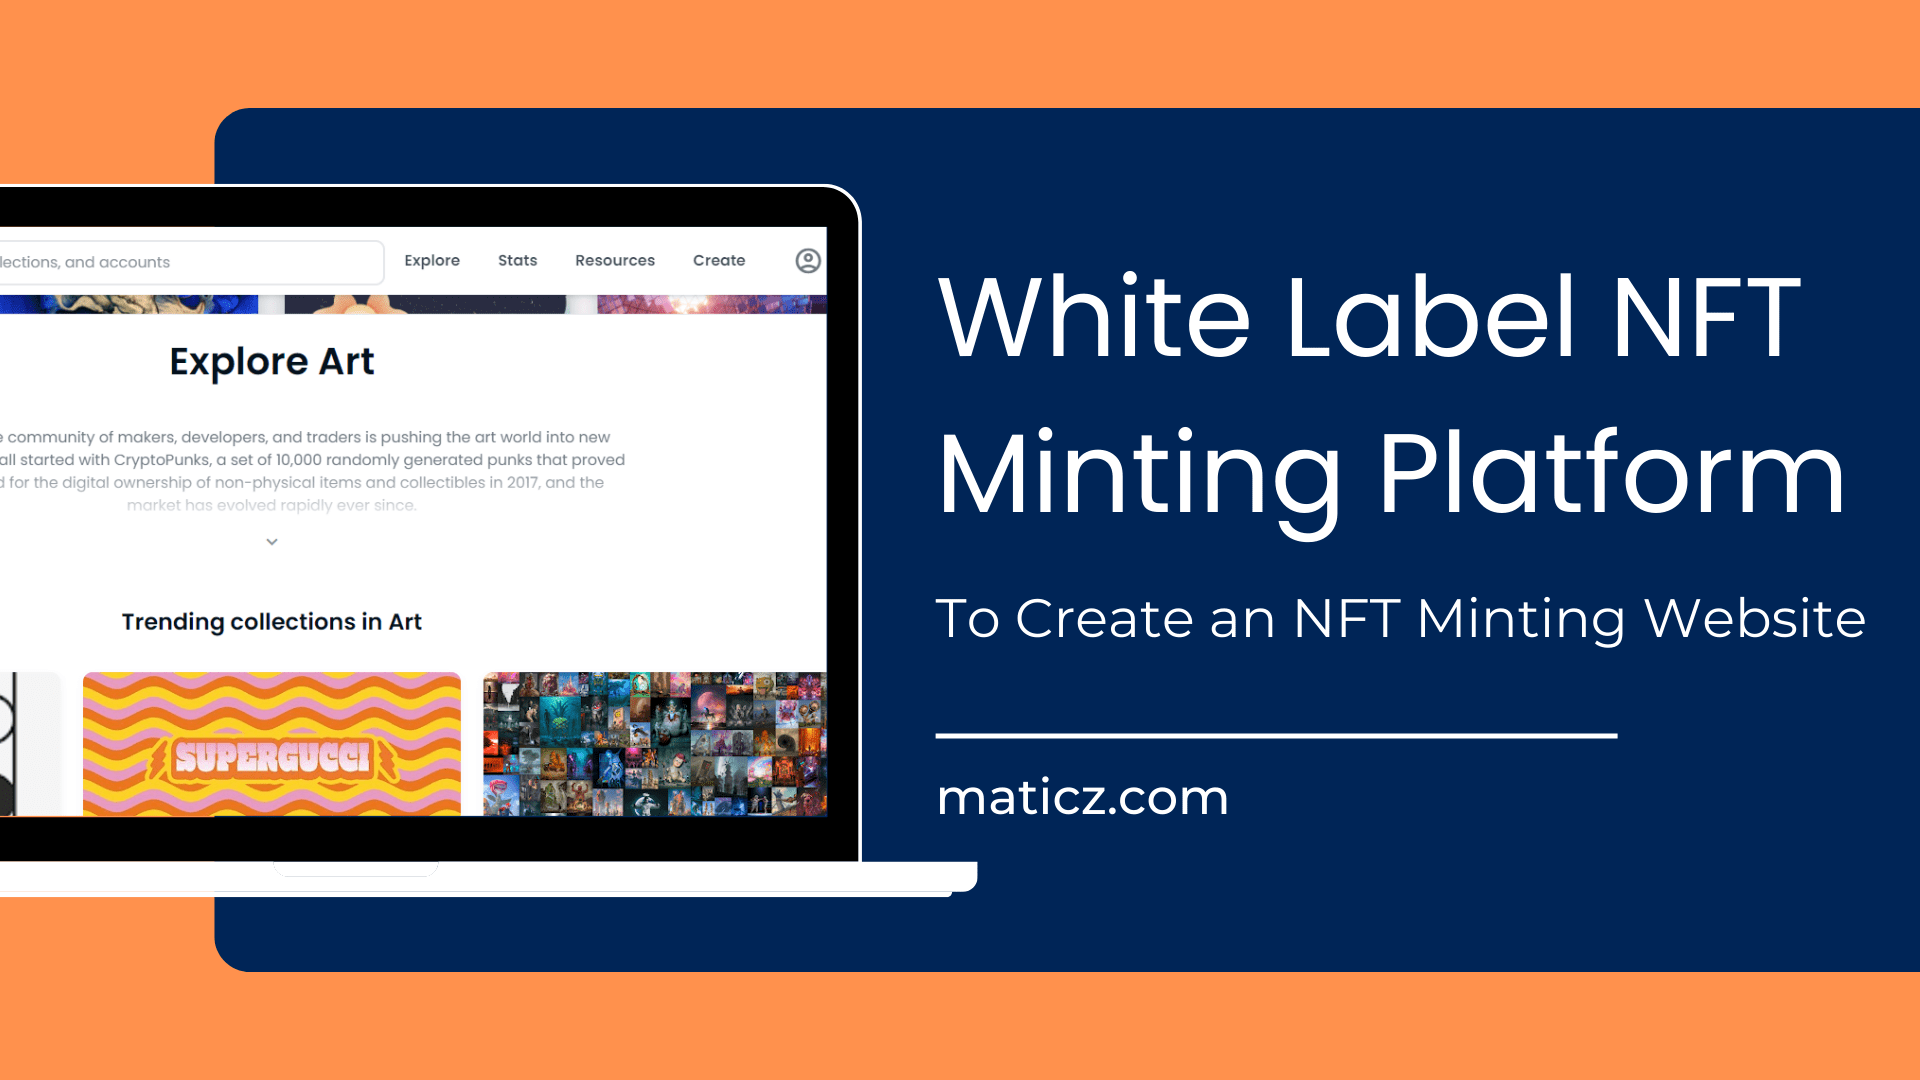 Whitelabel NFT Minting Platform – Create an NFT Minting Platform in a Cost-Effective way